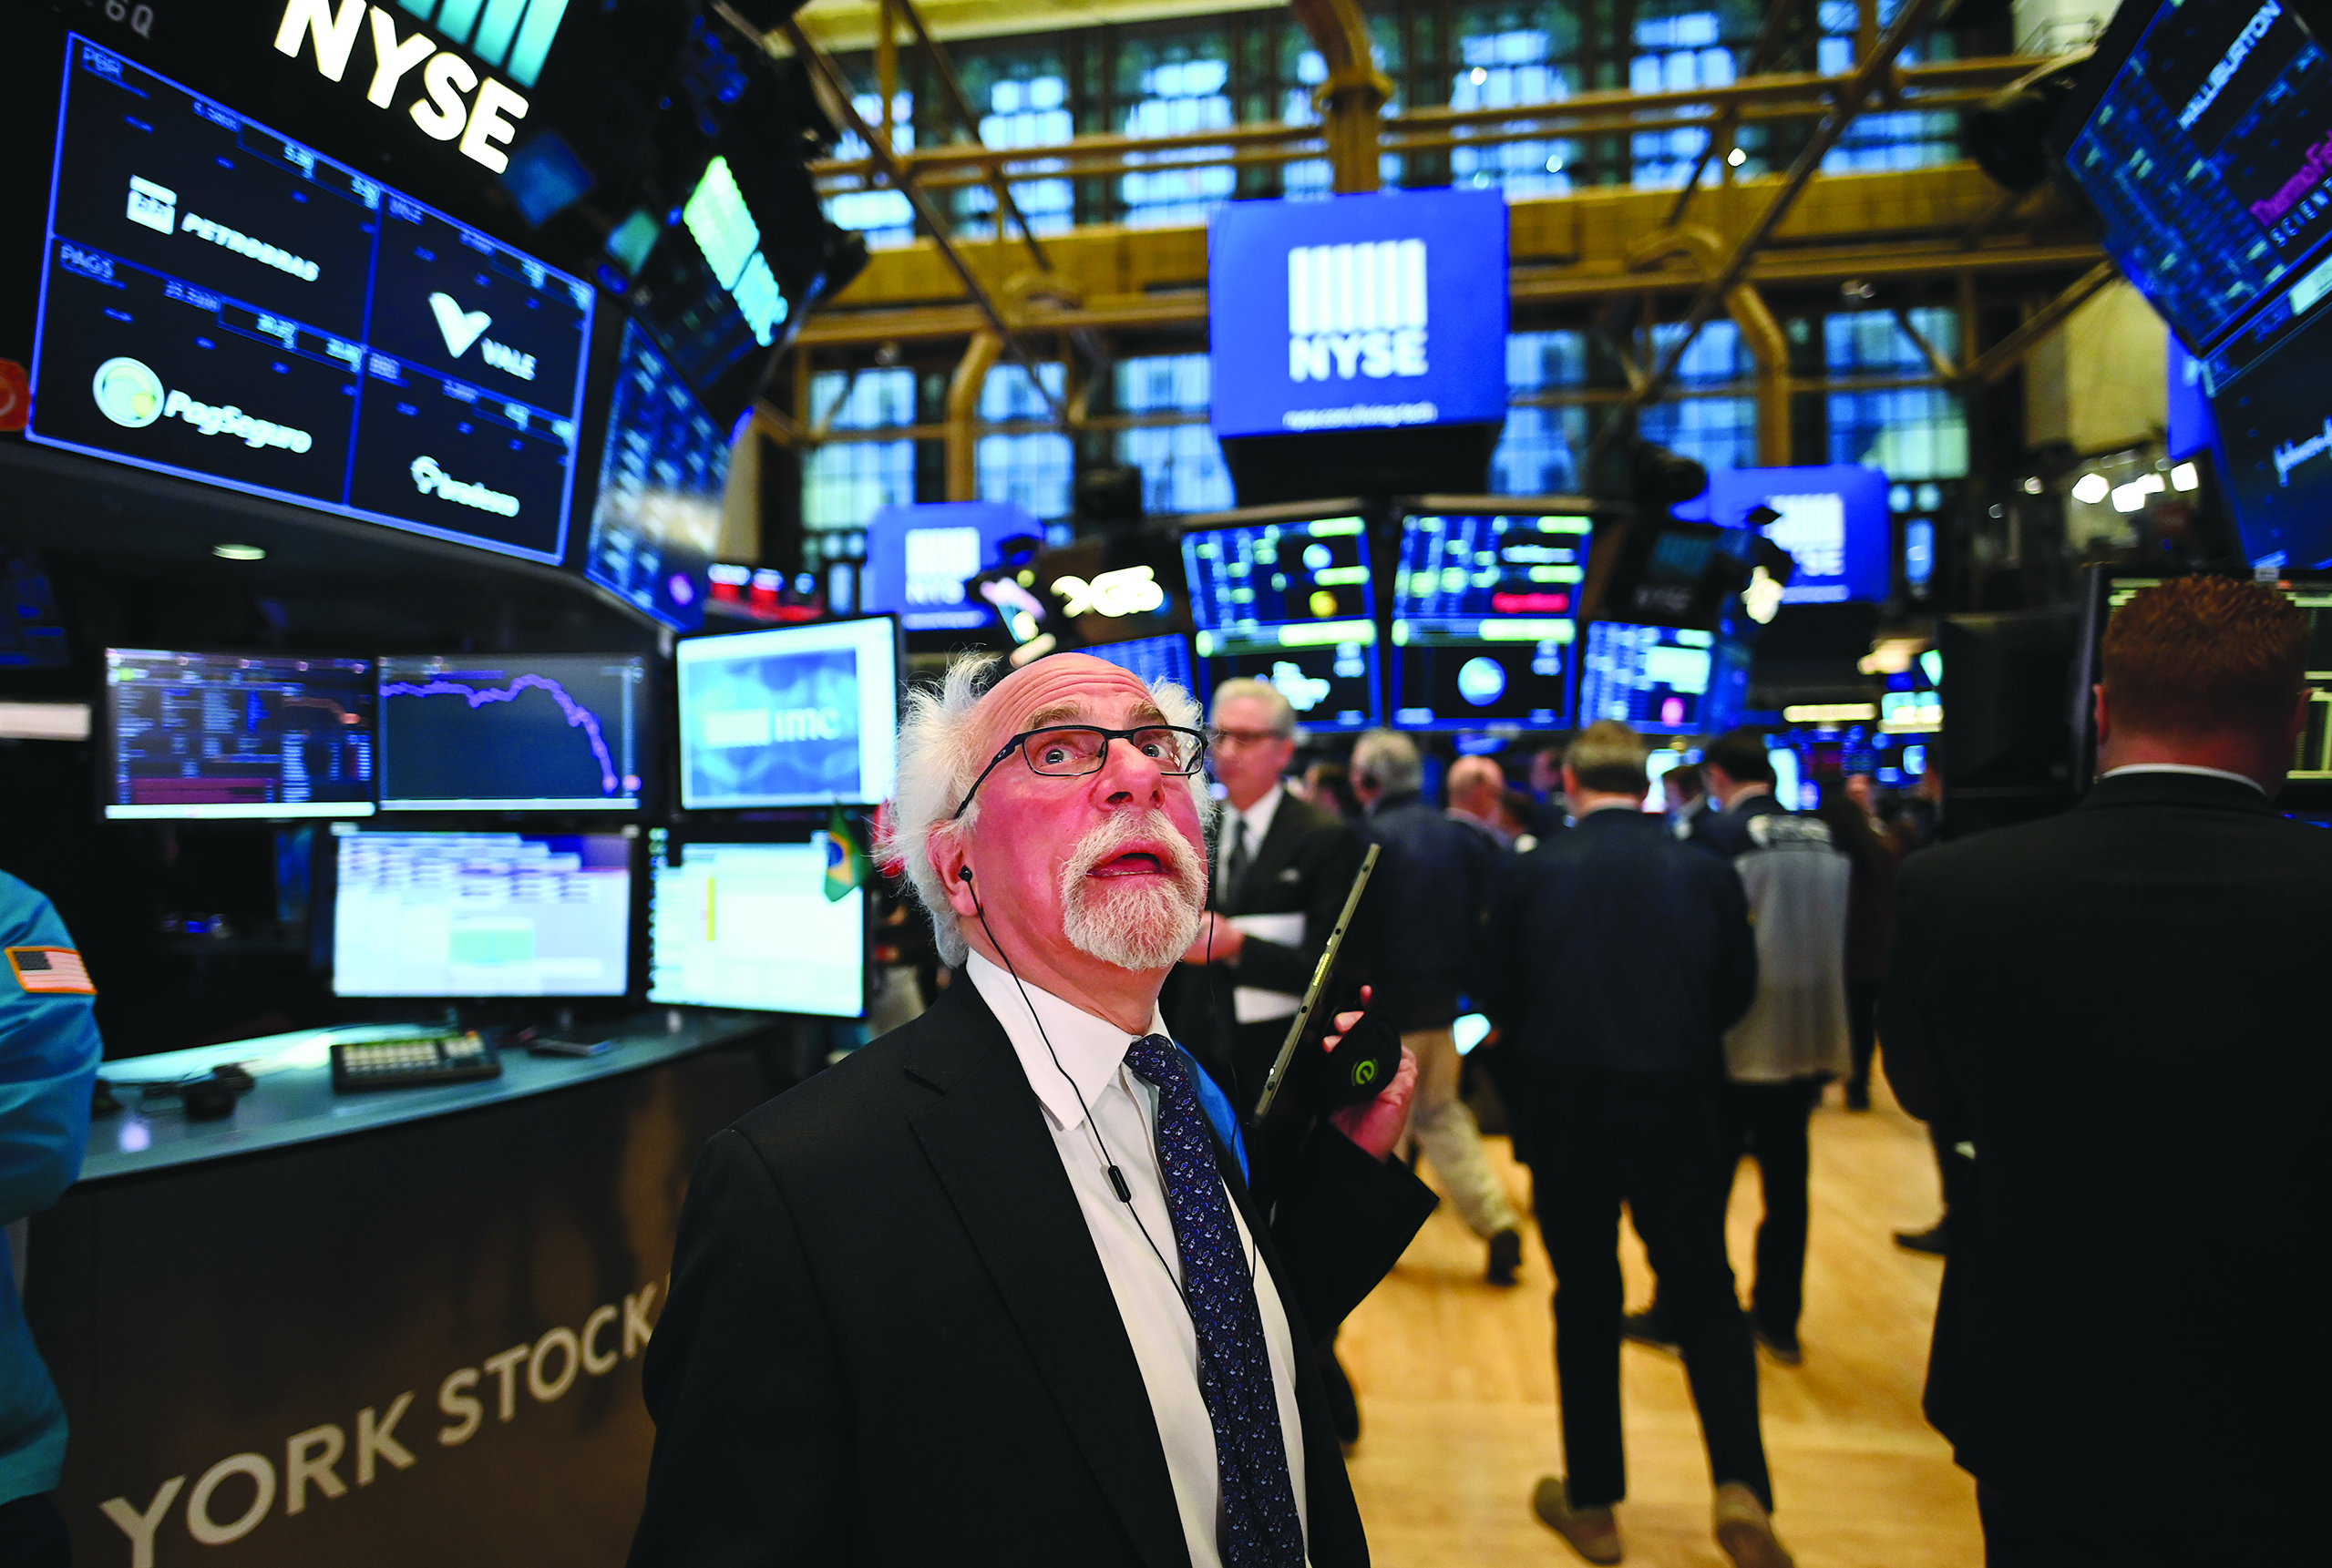 Traders work during the opening bell at the New York Stock Exchange (NYSE) on March 16, 2020 at Wall Street in New York City. - Wall Street trading halted after the opening bell on deep losses. (Photo by Johannes EISELE / AFP)